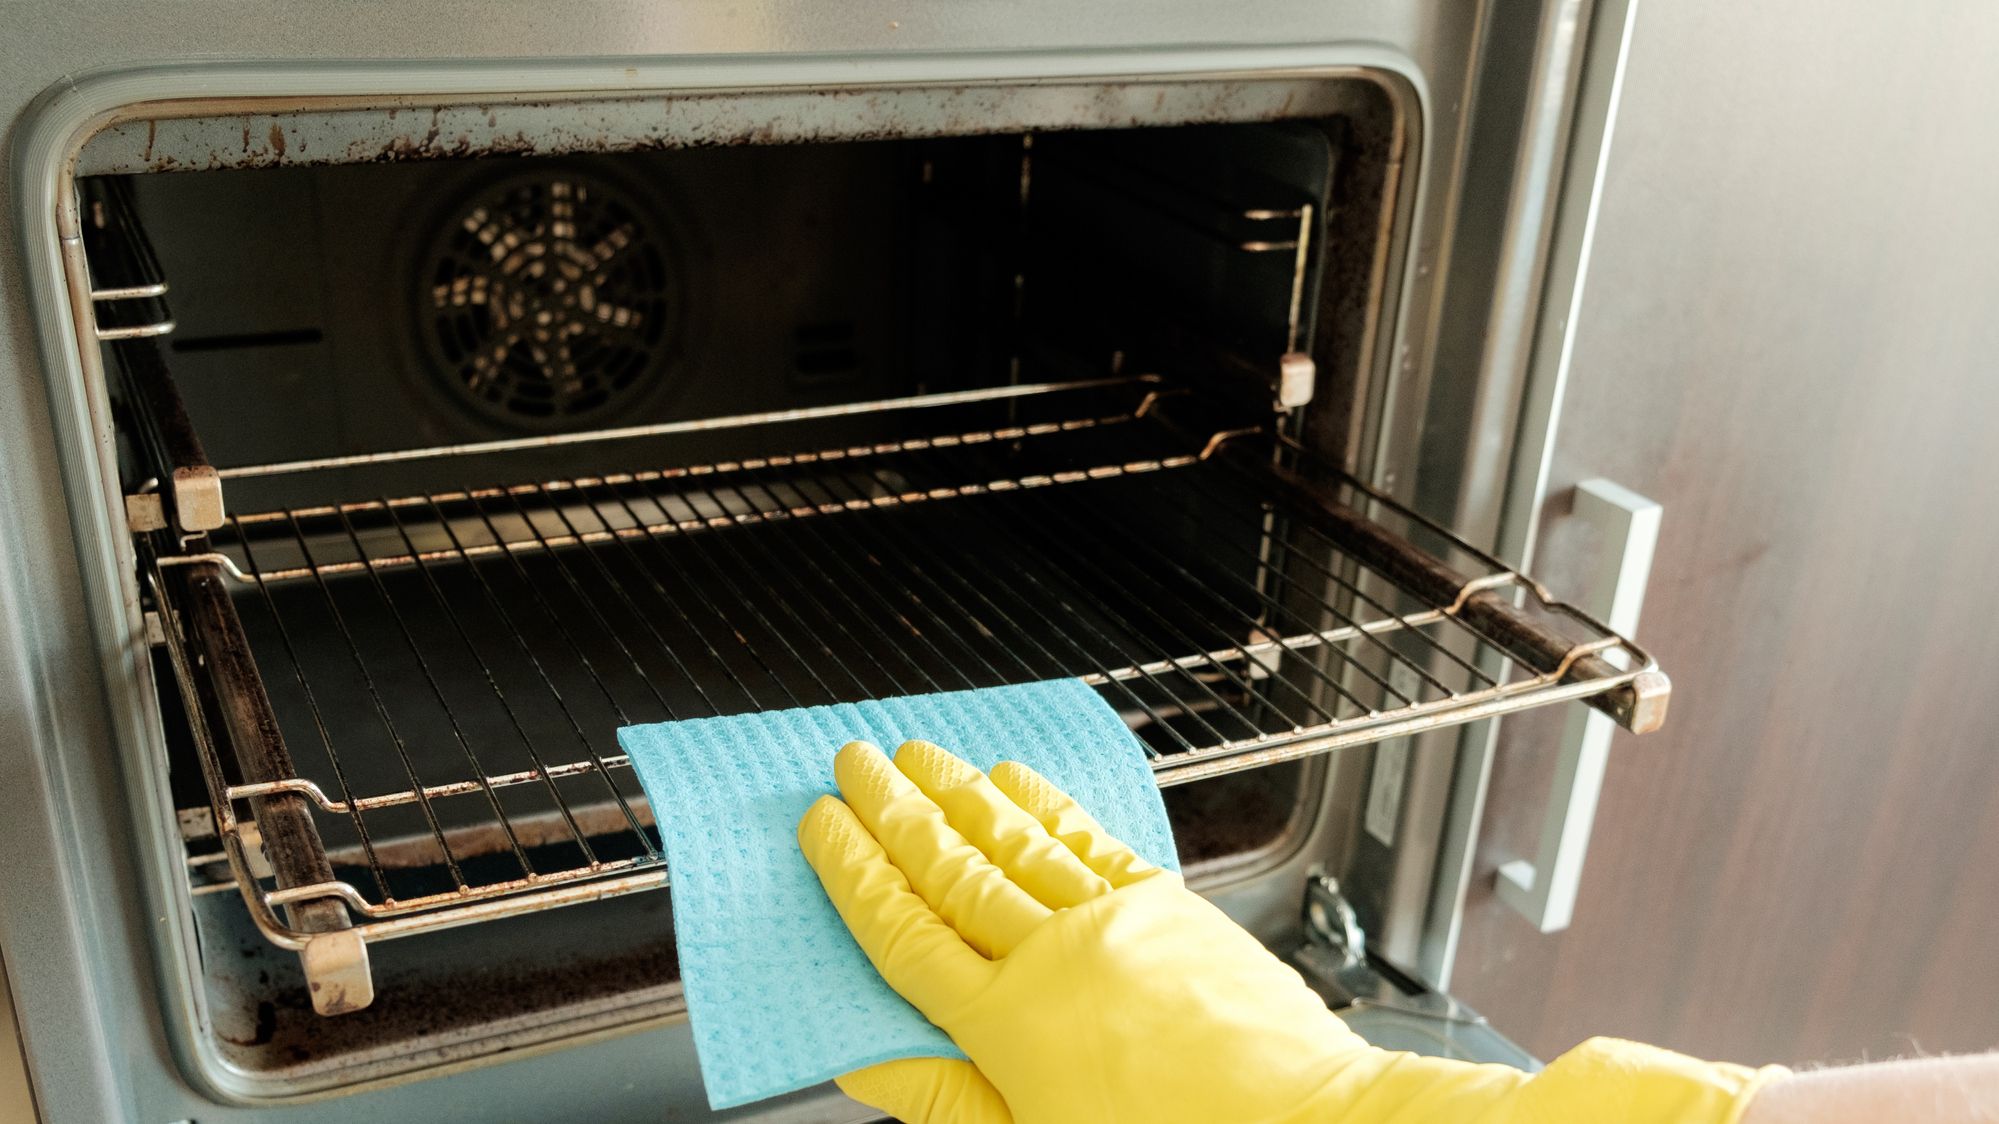 Best Oven Cleaning Tips and Tricks of 2022